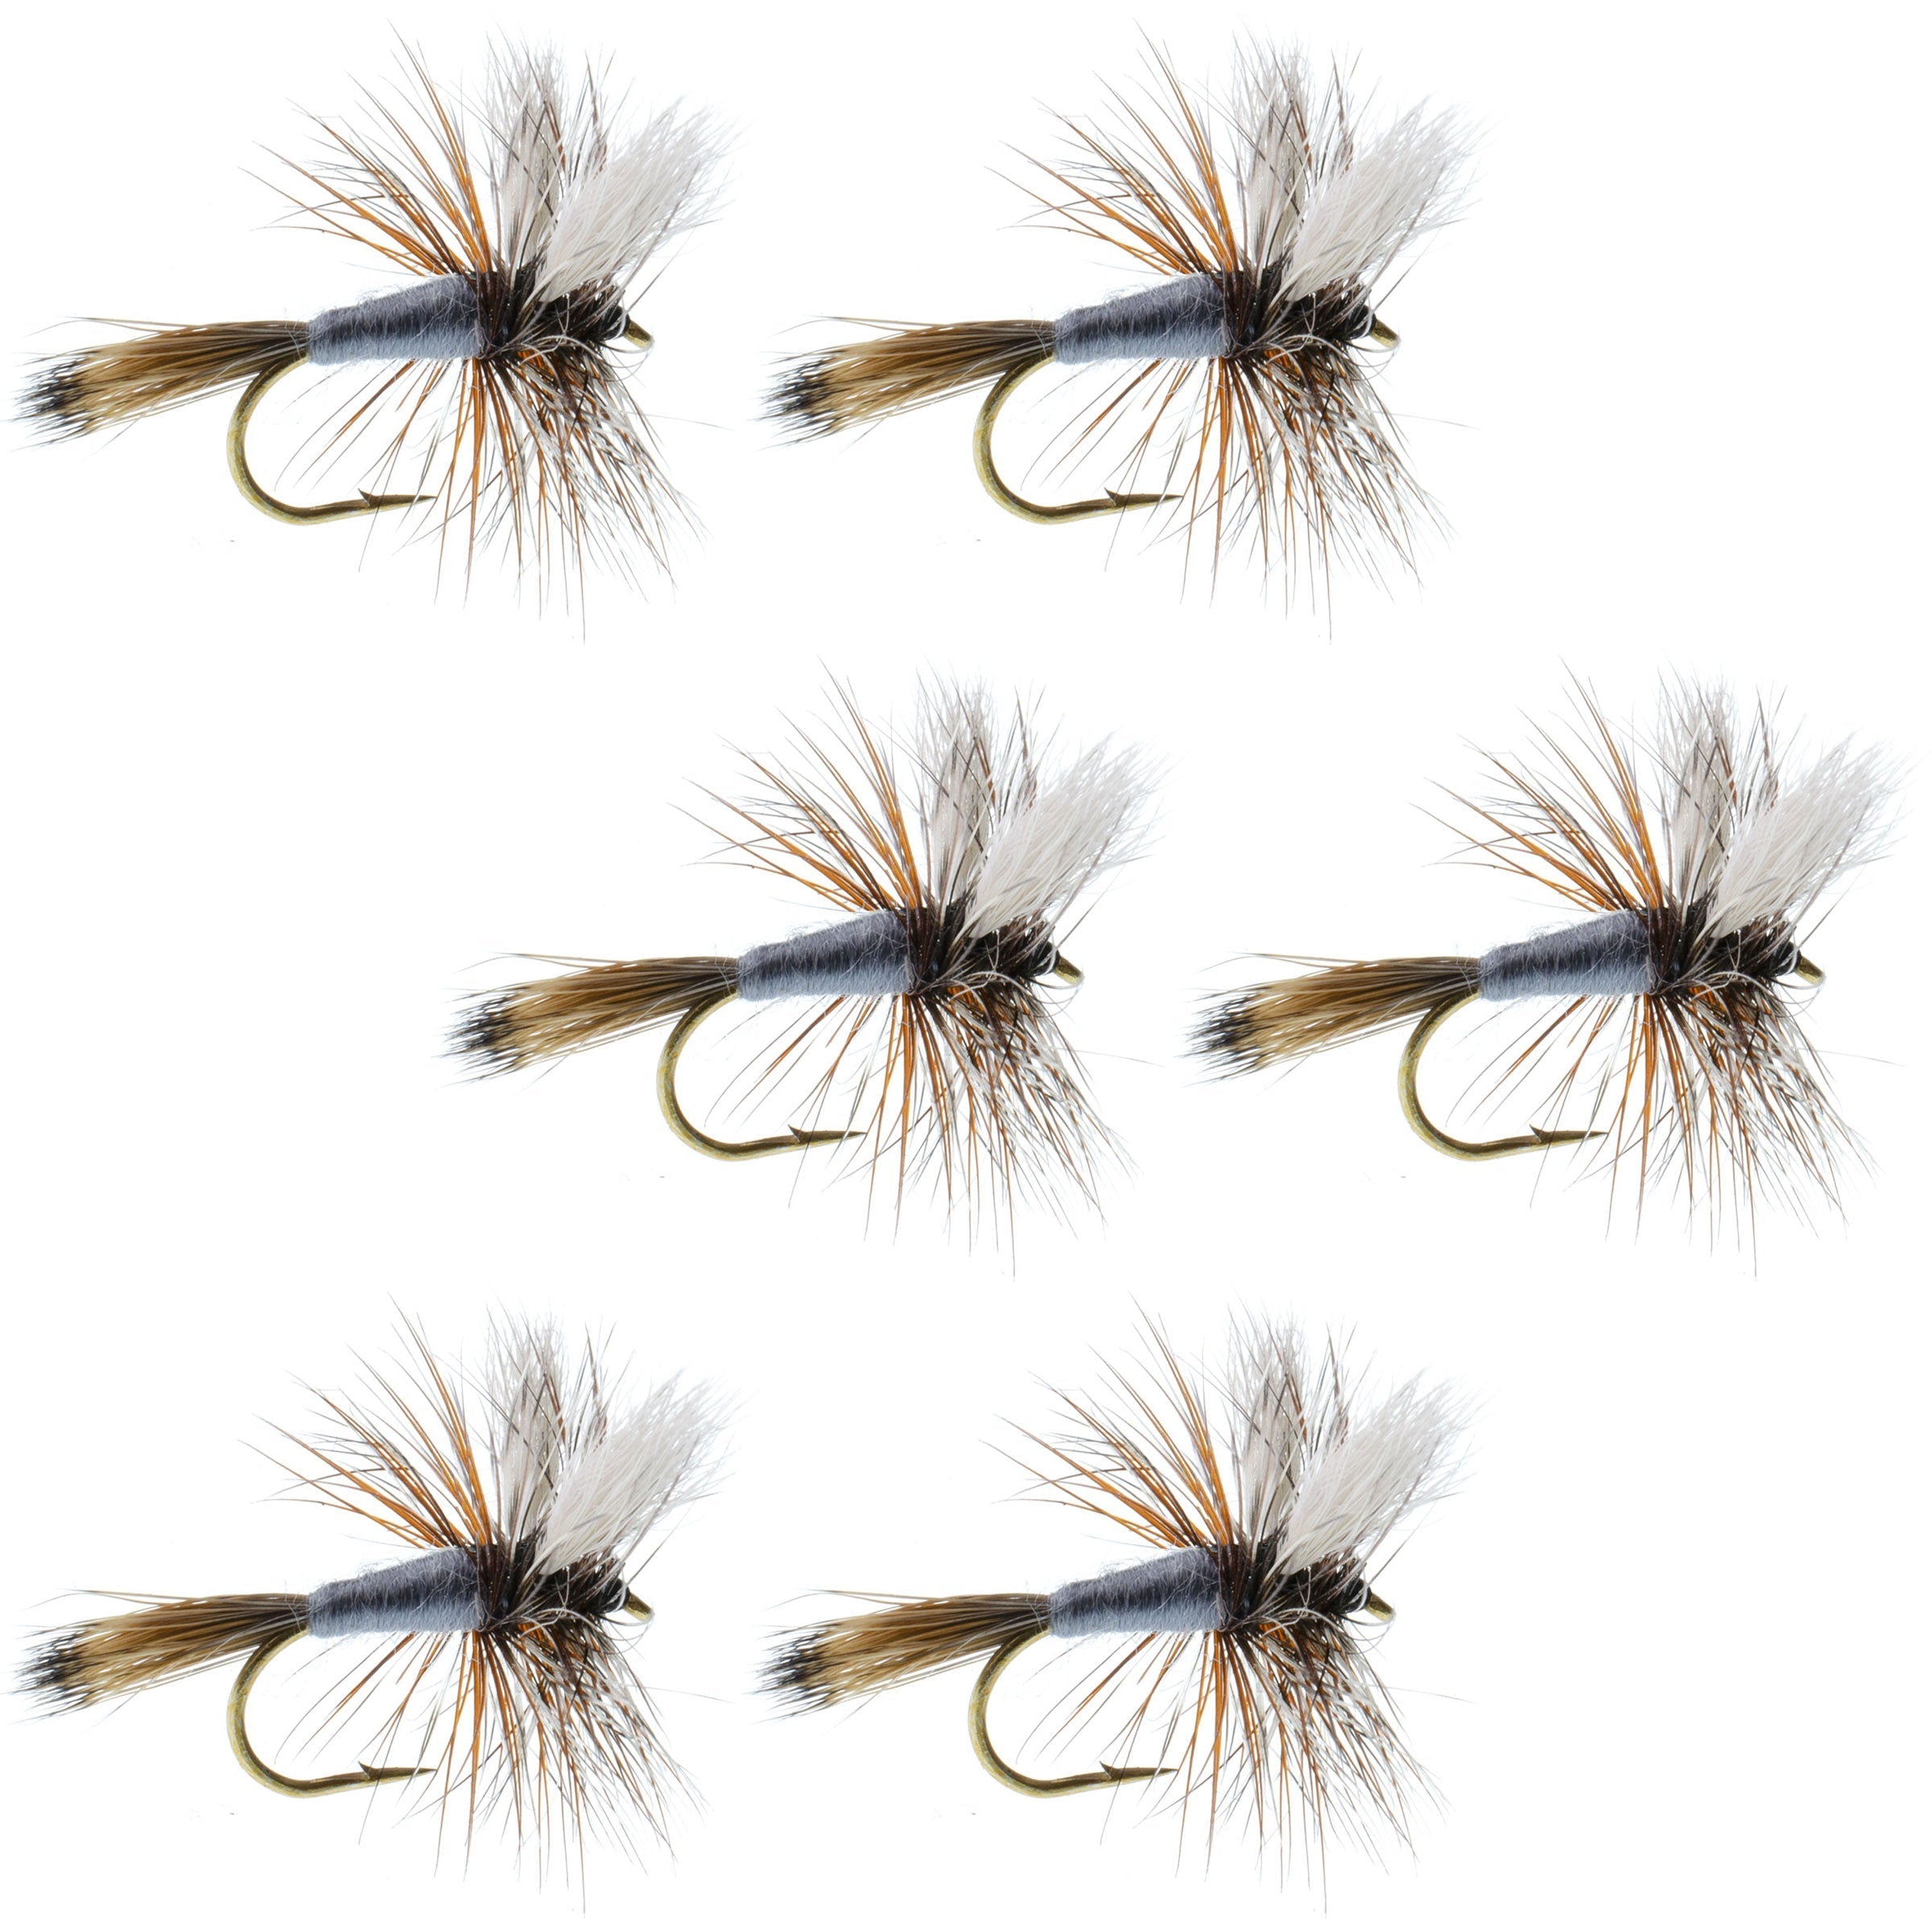 Eastern Trout Fly Assortment 12 Essential Dry and Nymph Fly